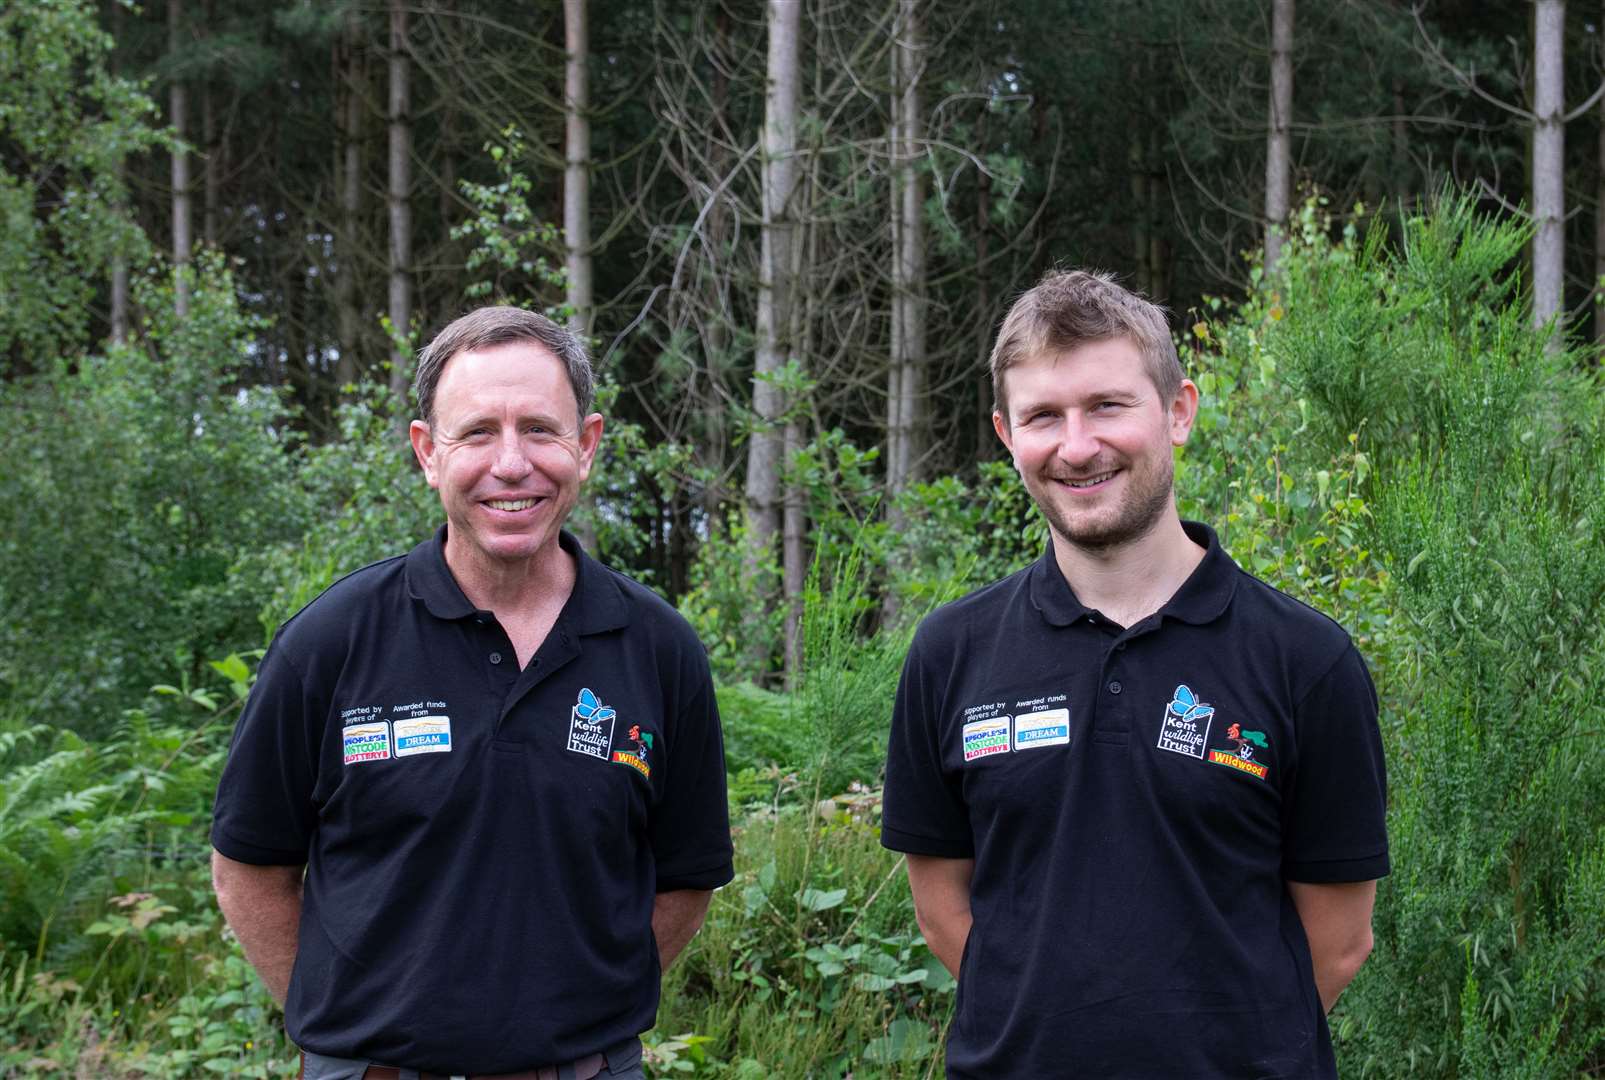 Donovan Wright and Tom Gibbs are the UK's first bison rangers and will be based at Blean Woods near Canterbury